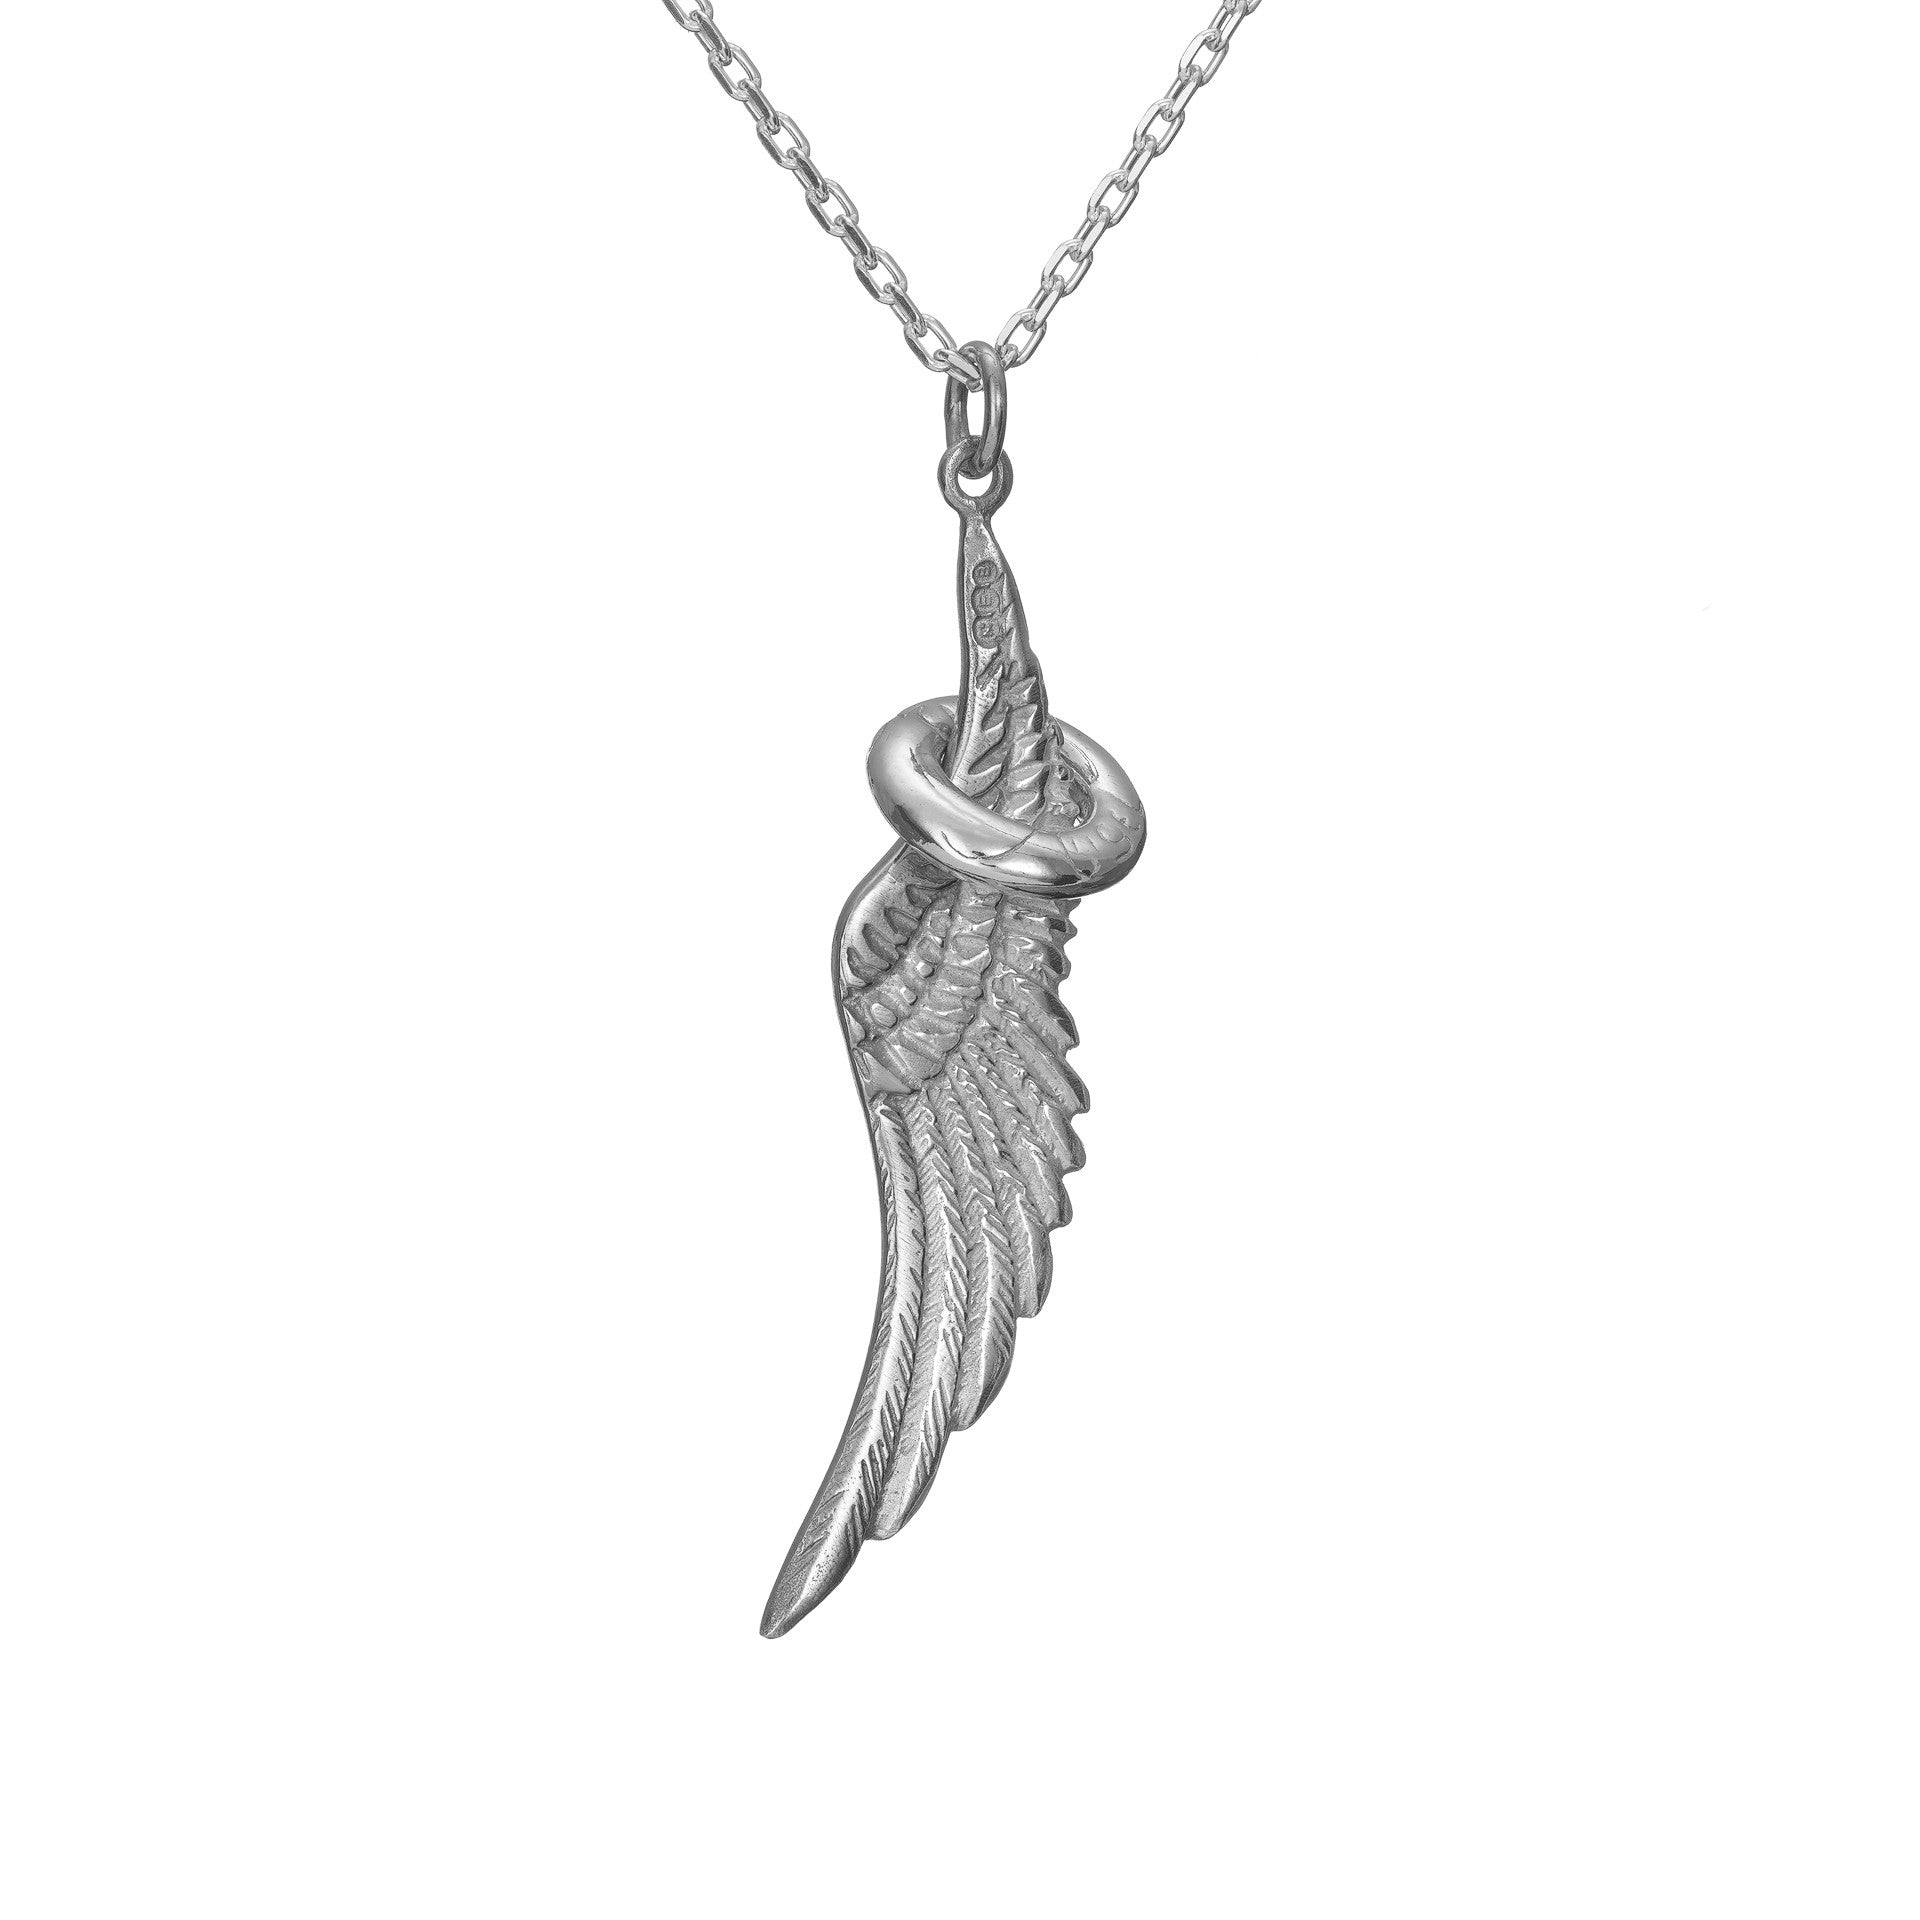 Sterling Silver Angel Wing & angel halo pendant on a silver chain, the perfect Irish jewellery gift. Part of Elena Brennan's My Angel jewellery collection.